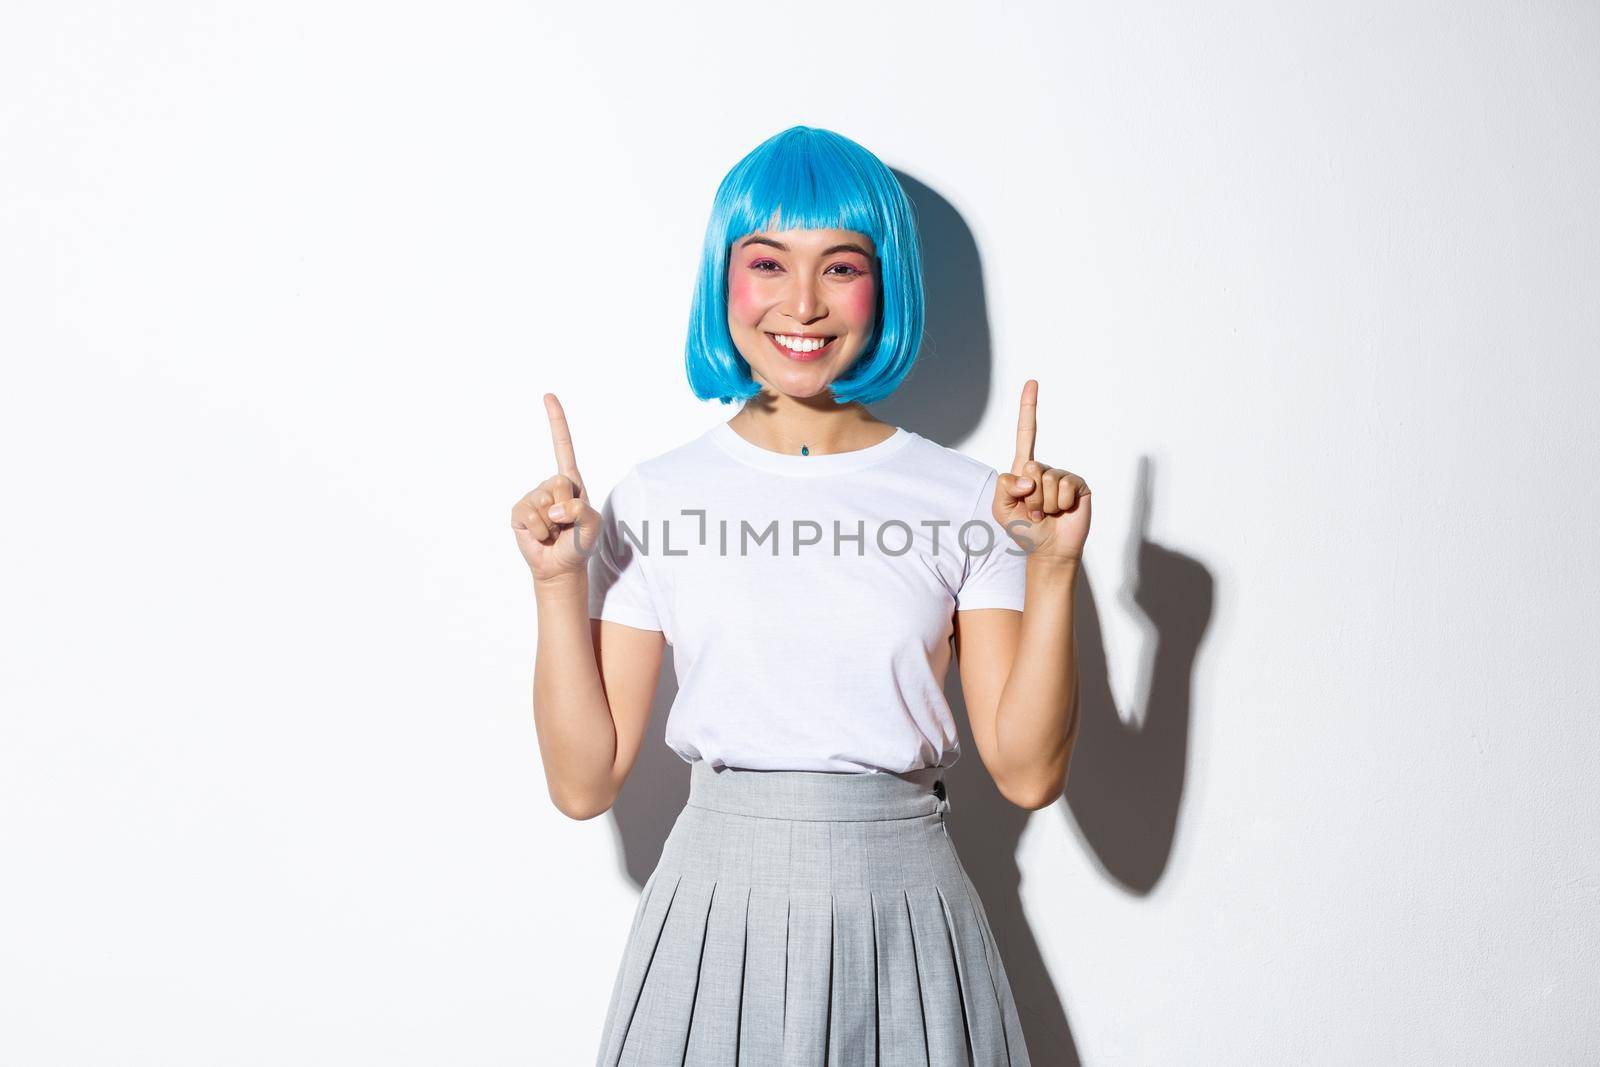 Cheerful asian woman in anime style outfit, wearing blue wig and smiling happy, pointing fingers up, showing advertisement, standing over white background.